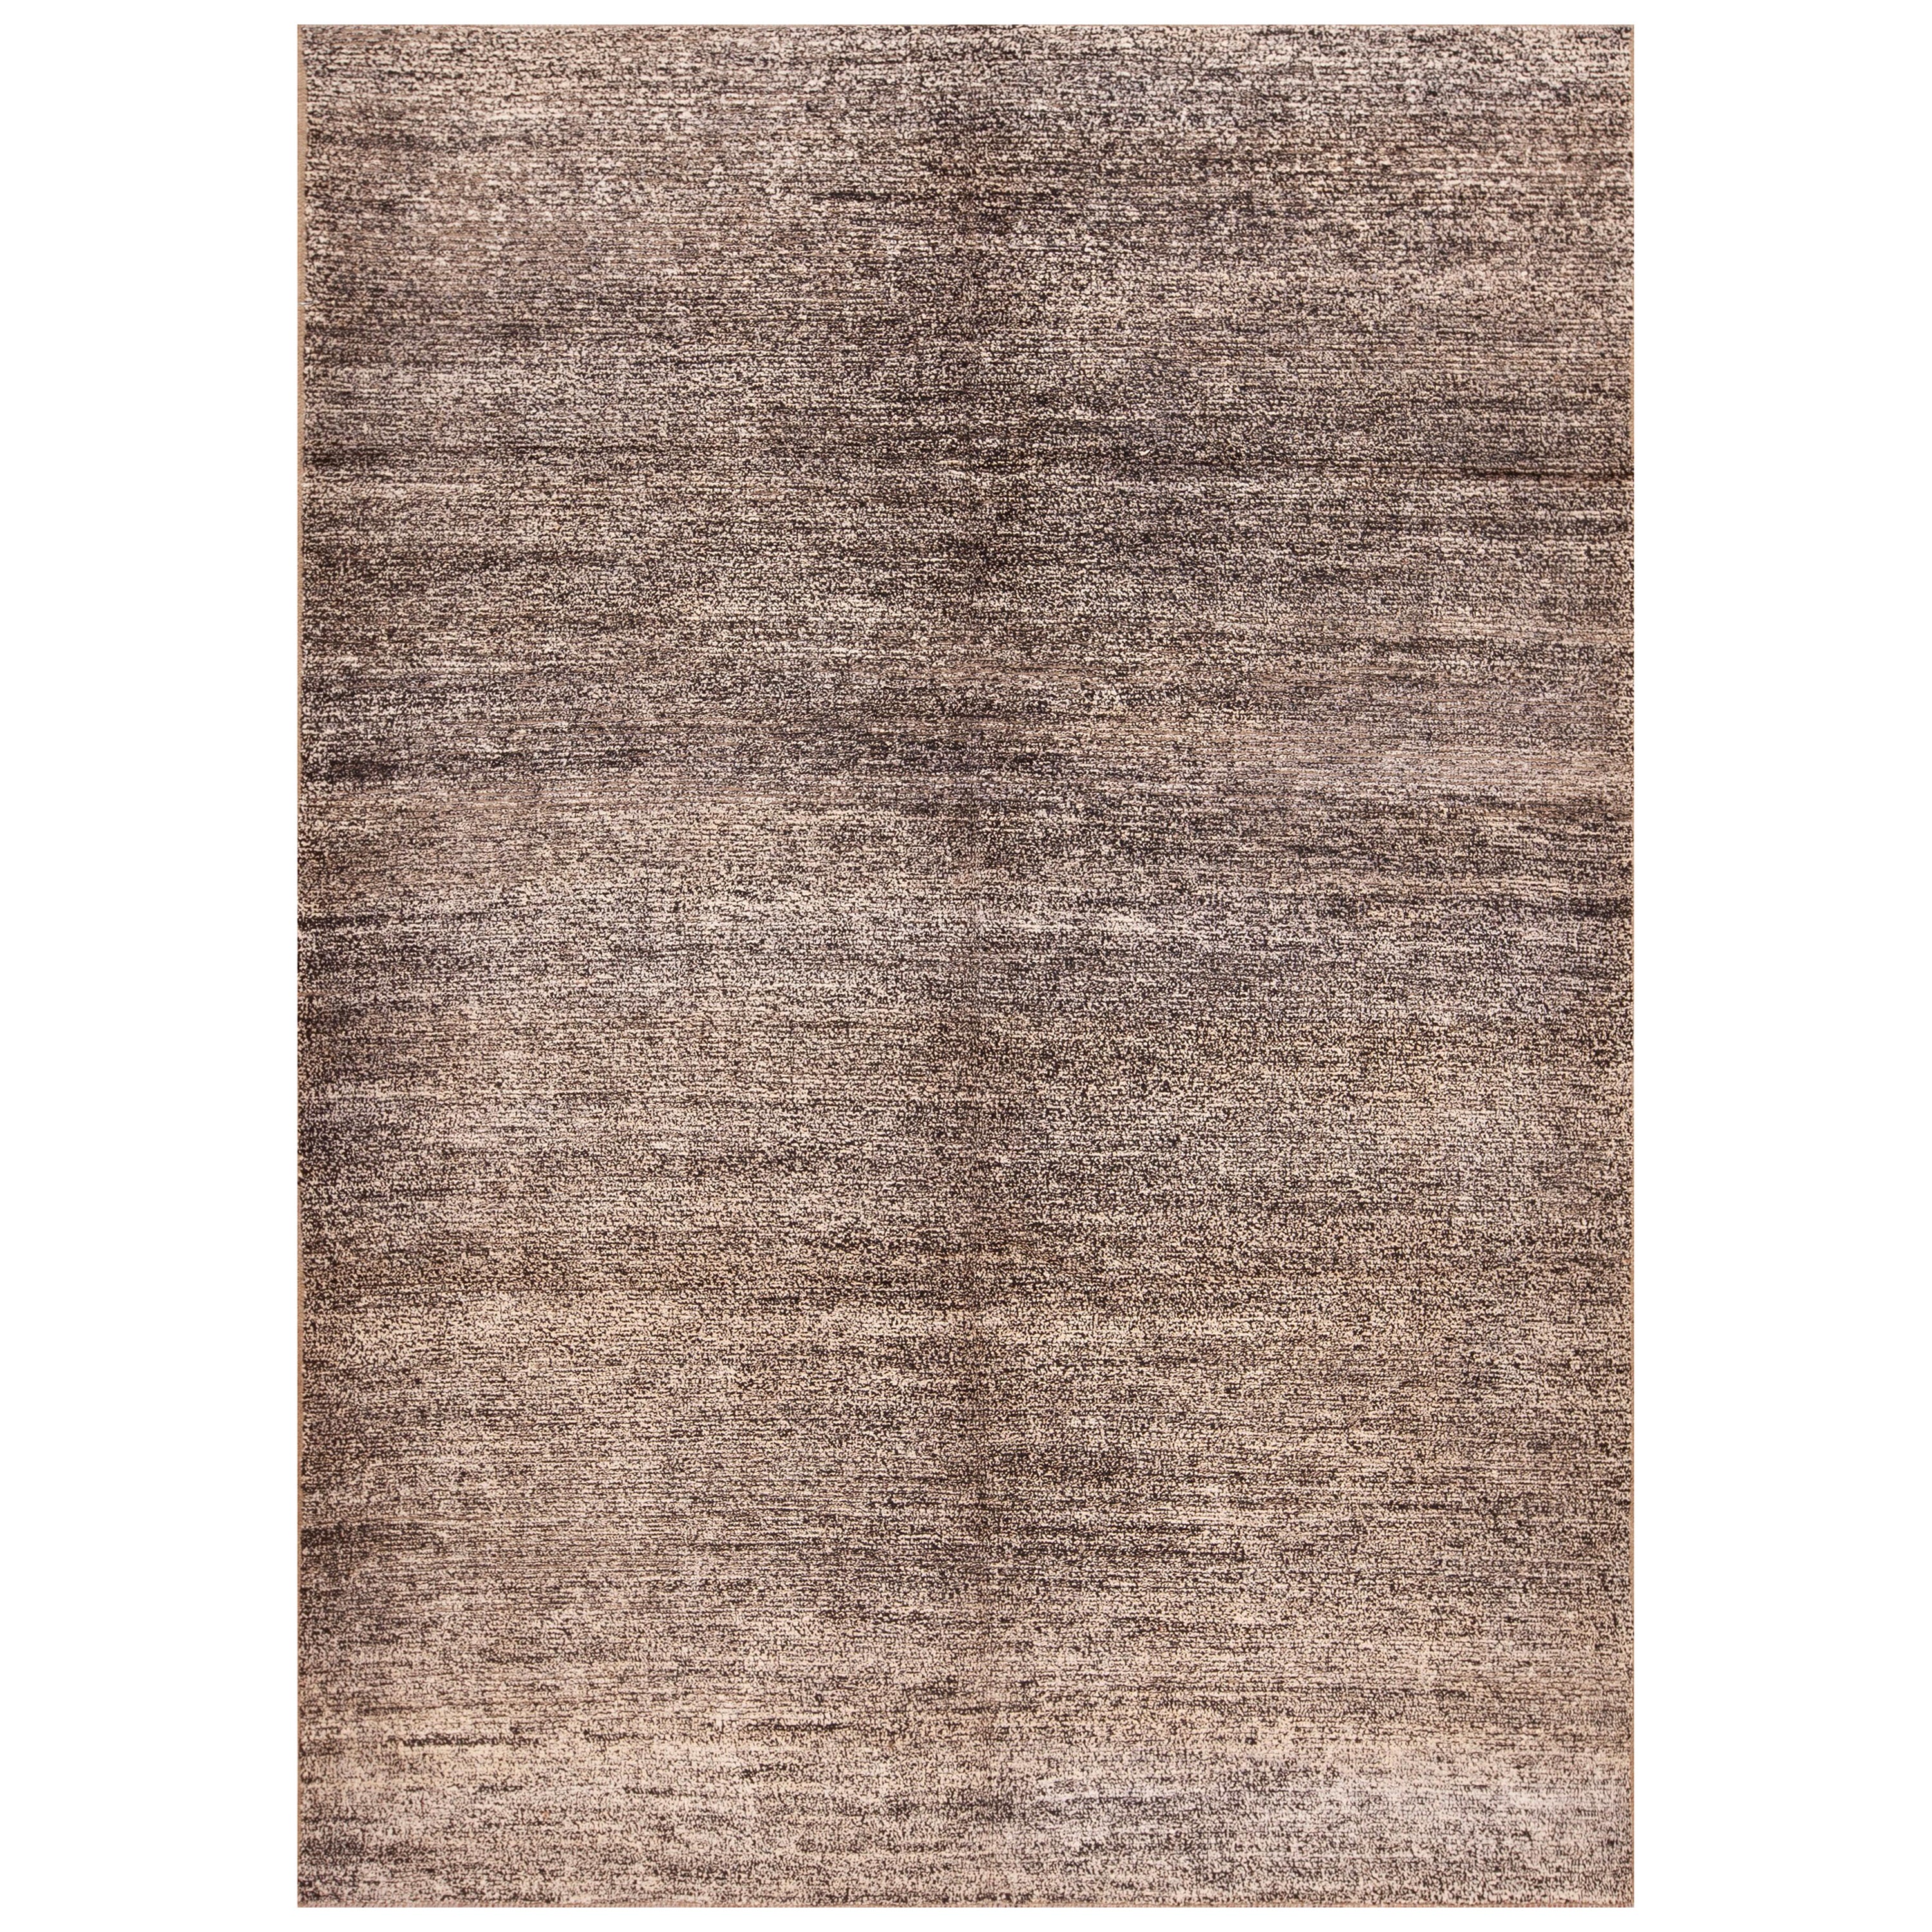 Nazmiyal Collection Abstract Salt and Pepper Color Modern Area Rug 6'6" x 9"